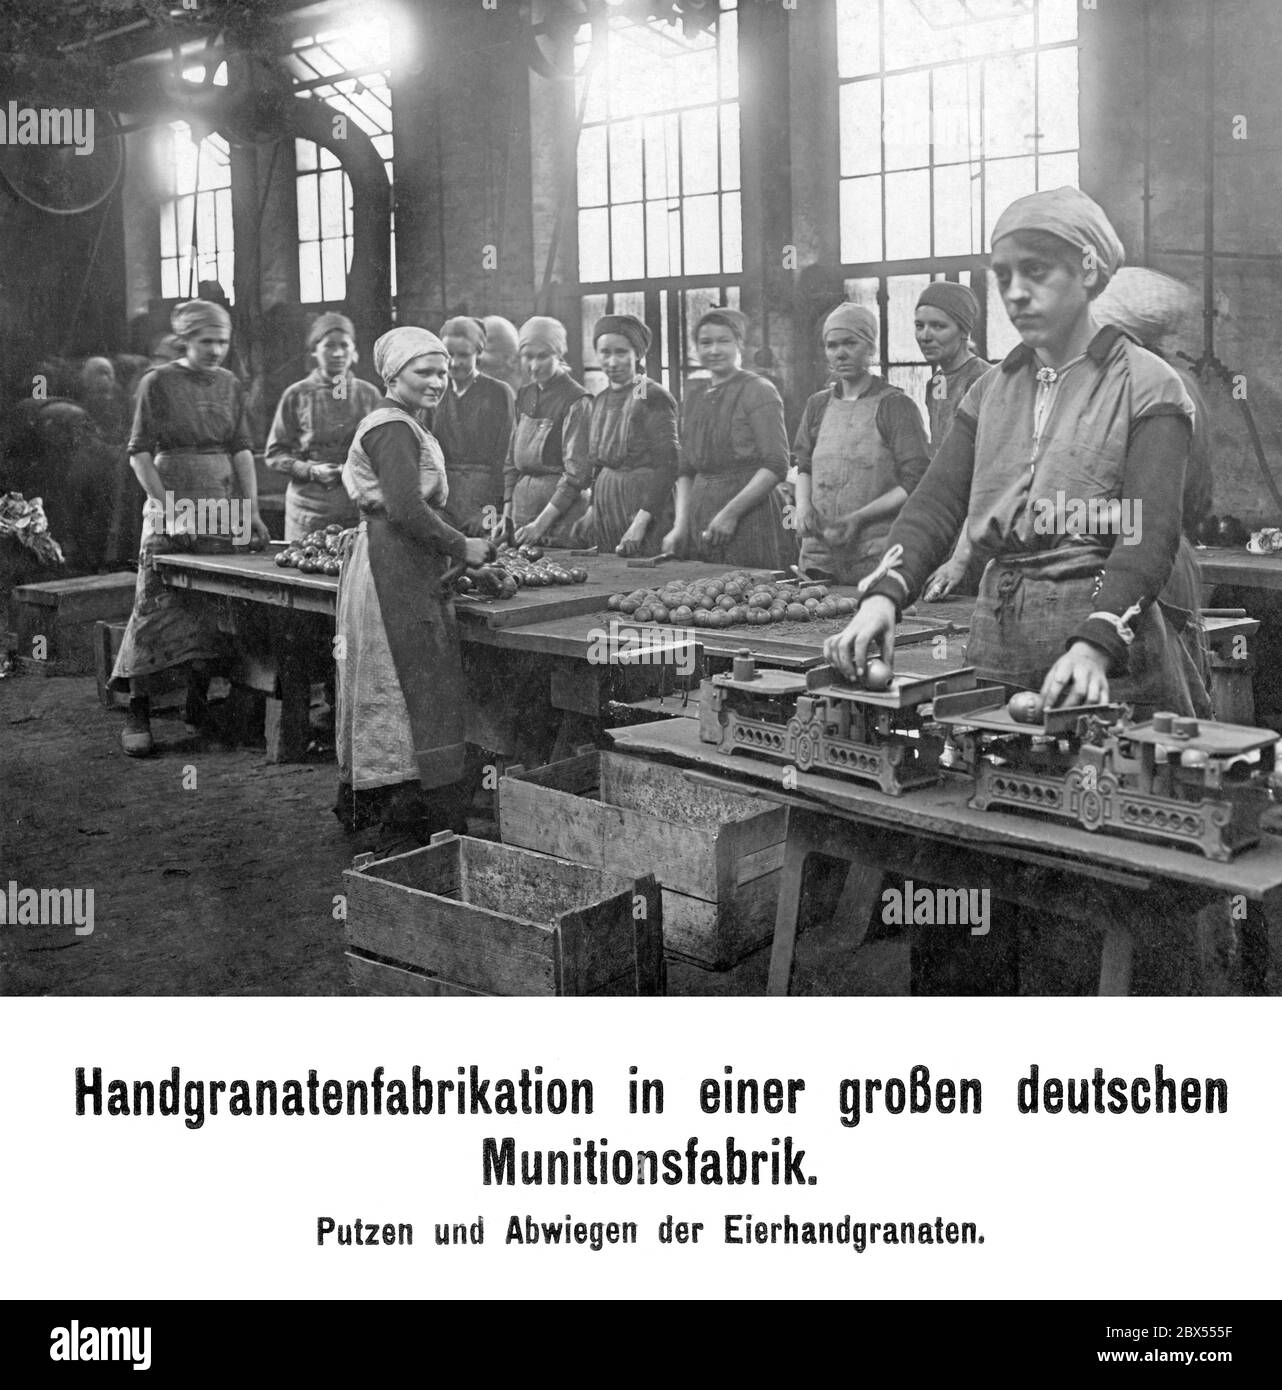 Production of hand grenades in a large German ammunition factory. Workers cleaning and weighing the egg hand grenades. Stock Photo